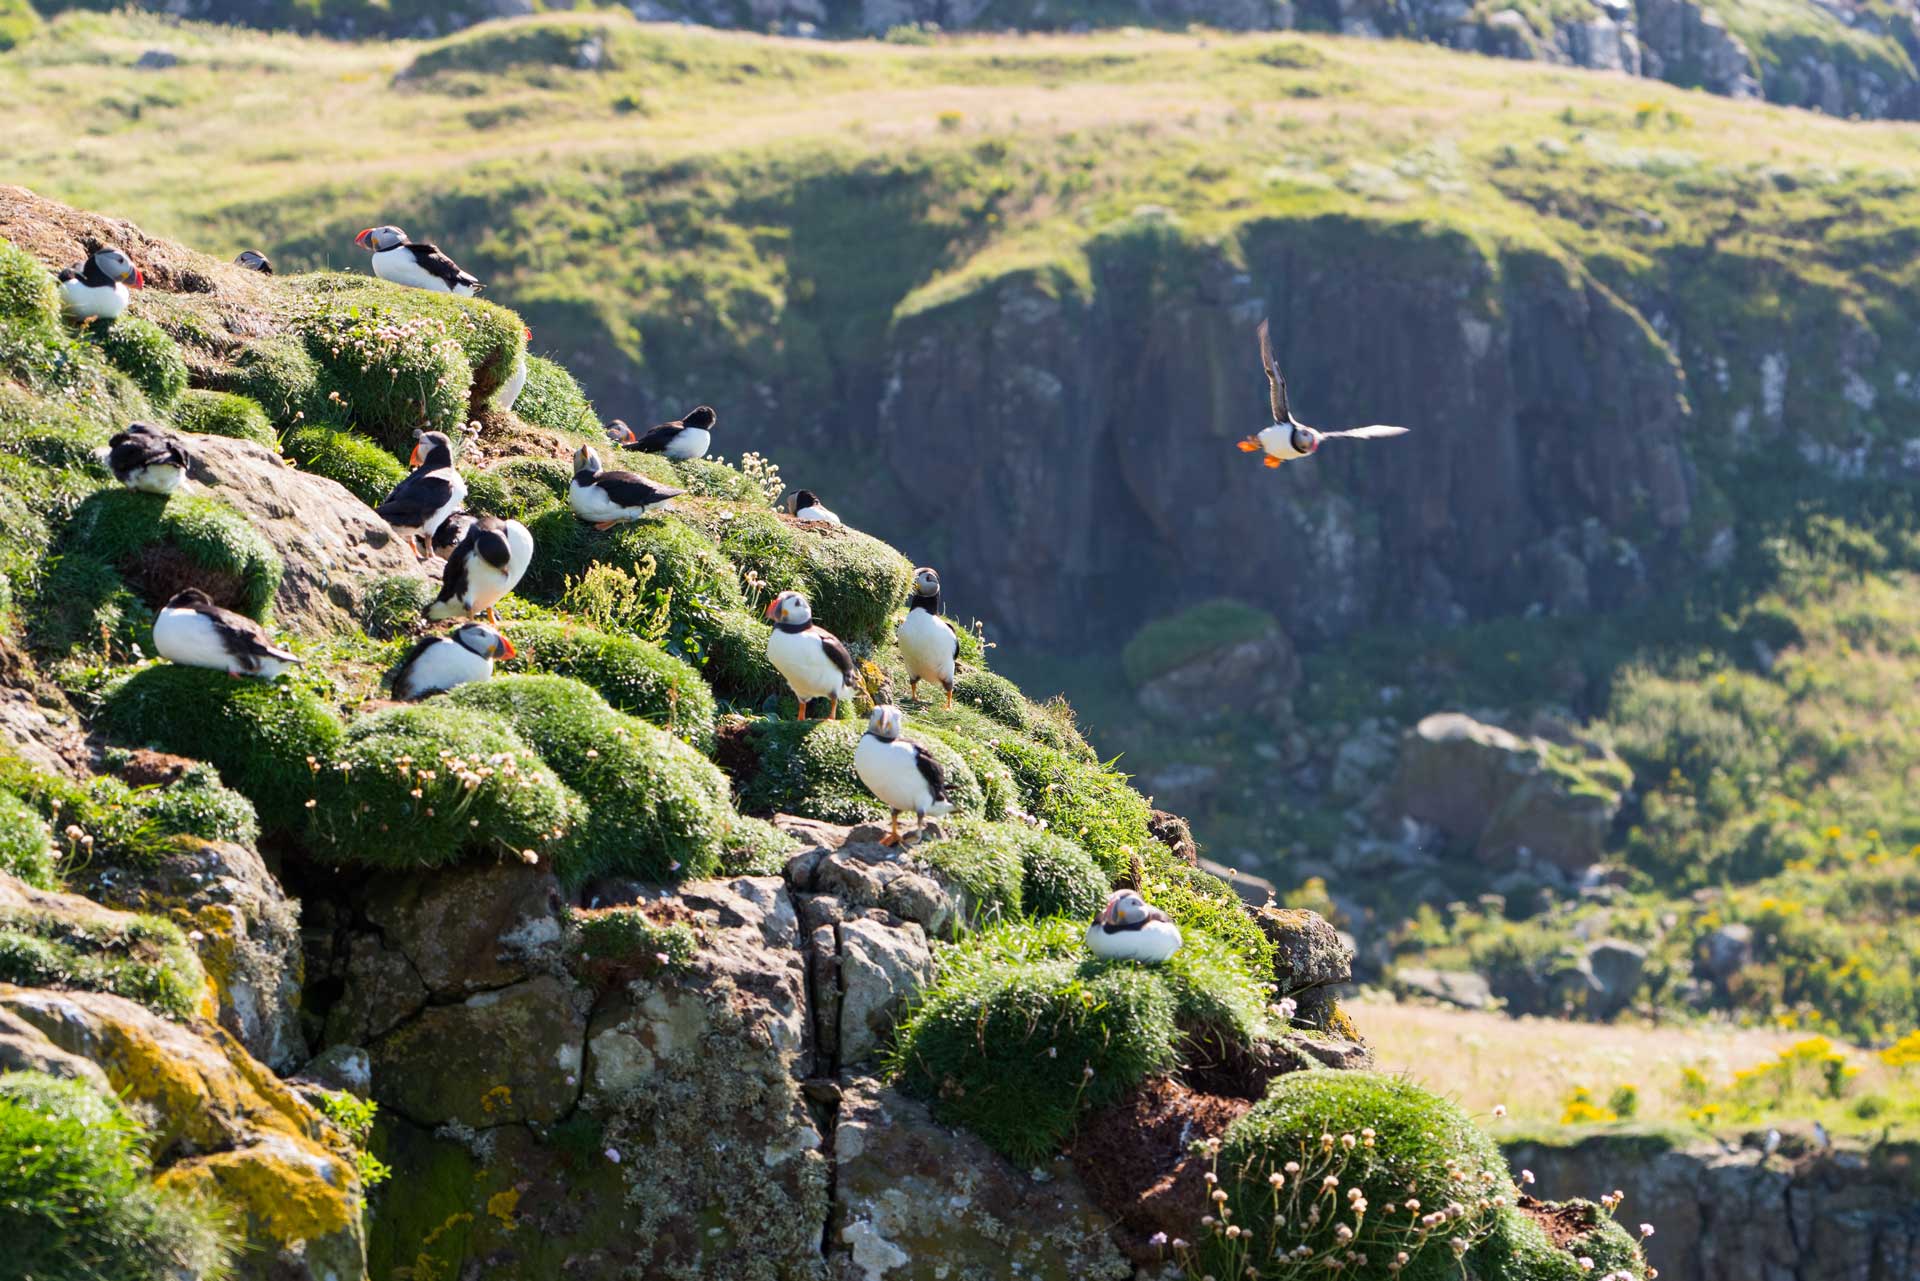 Explore Glencoe, Lochaber and the Western Isles and see puffins on the Treshnish isles from your base at Birchbrae Highland Lodges.